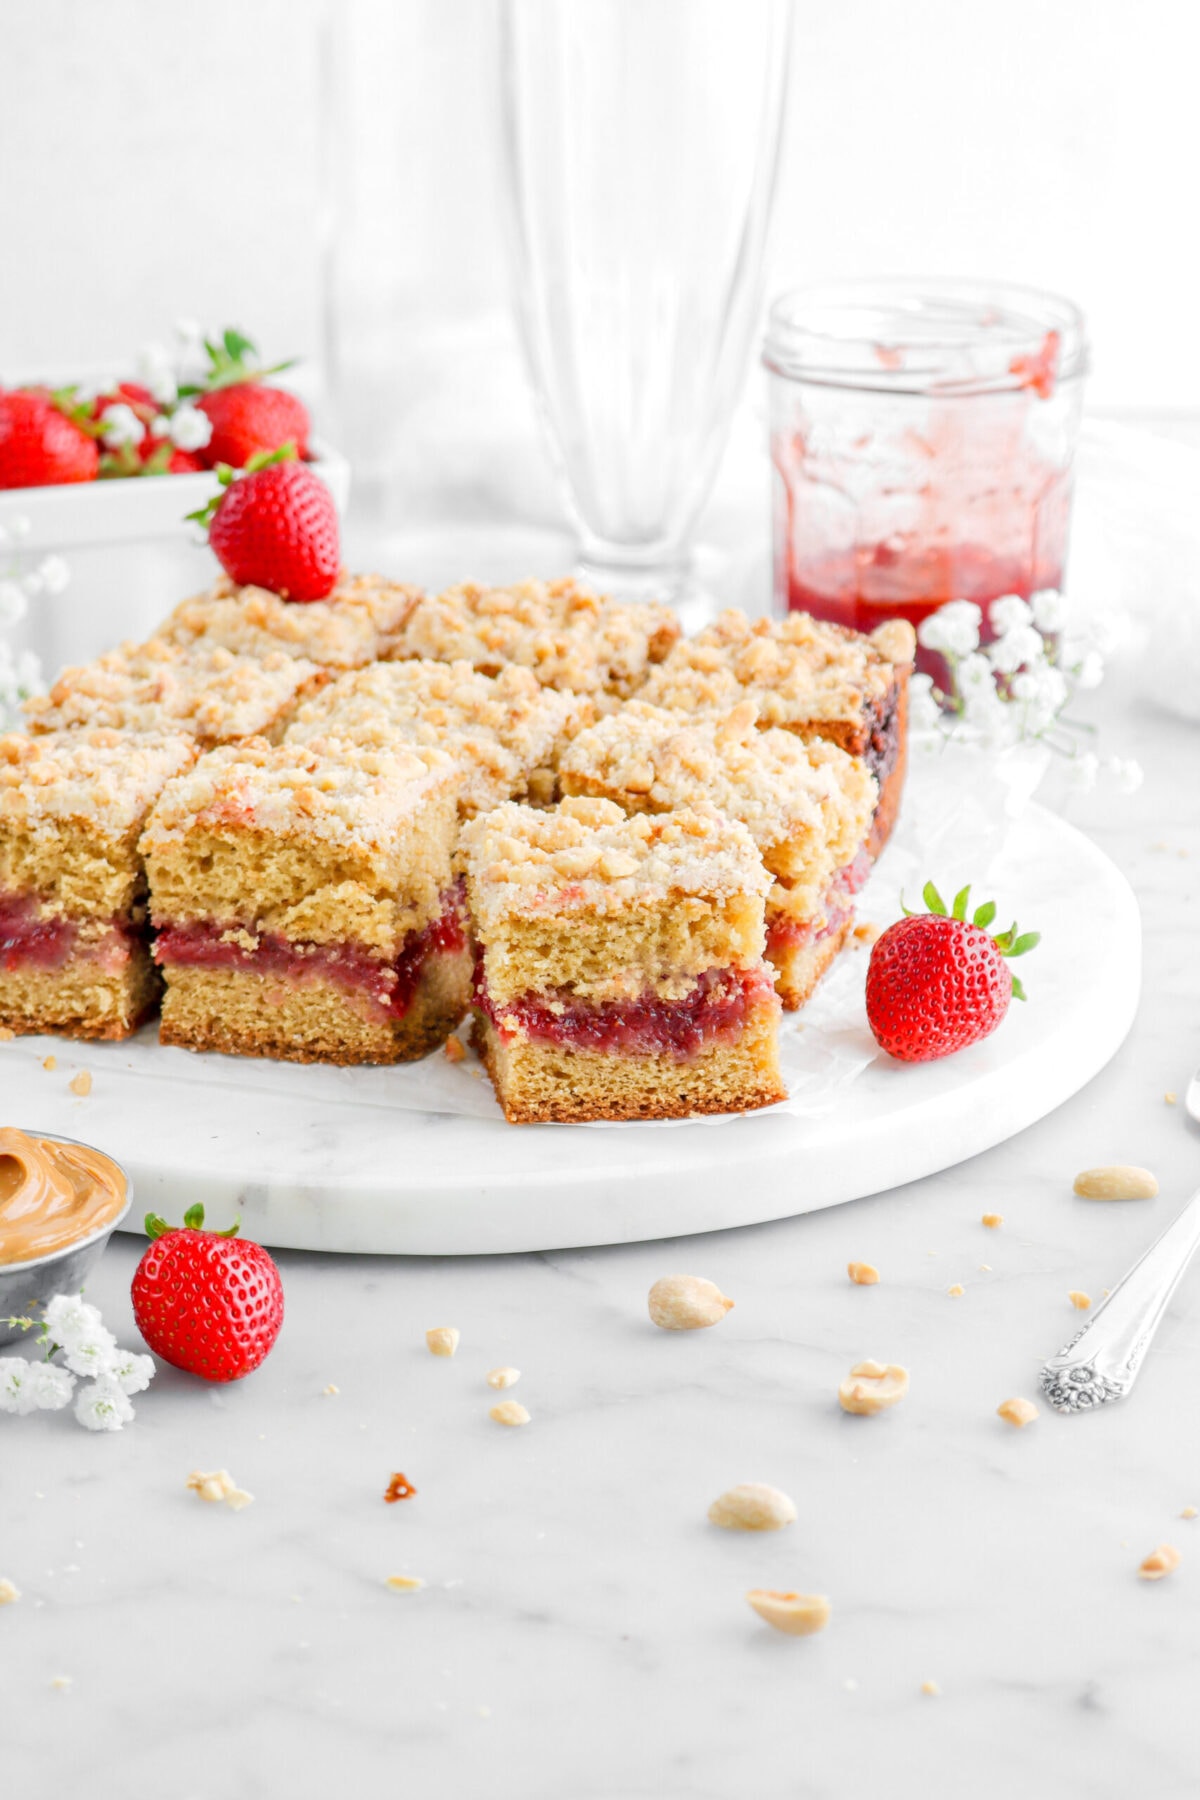 PB&J coffee cake on marble serving tray with fresh strawberries, white flowers, and peanuts around with jar of jam and empty glasses behind.